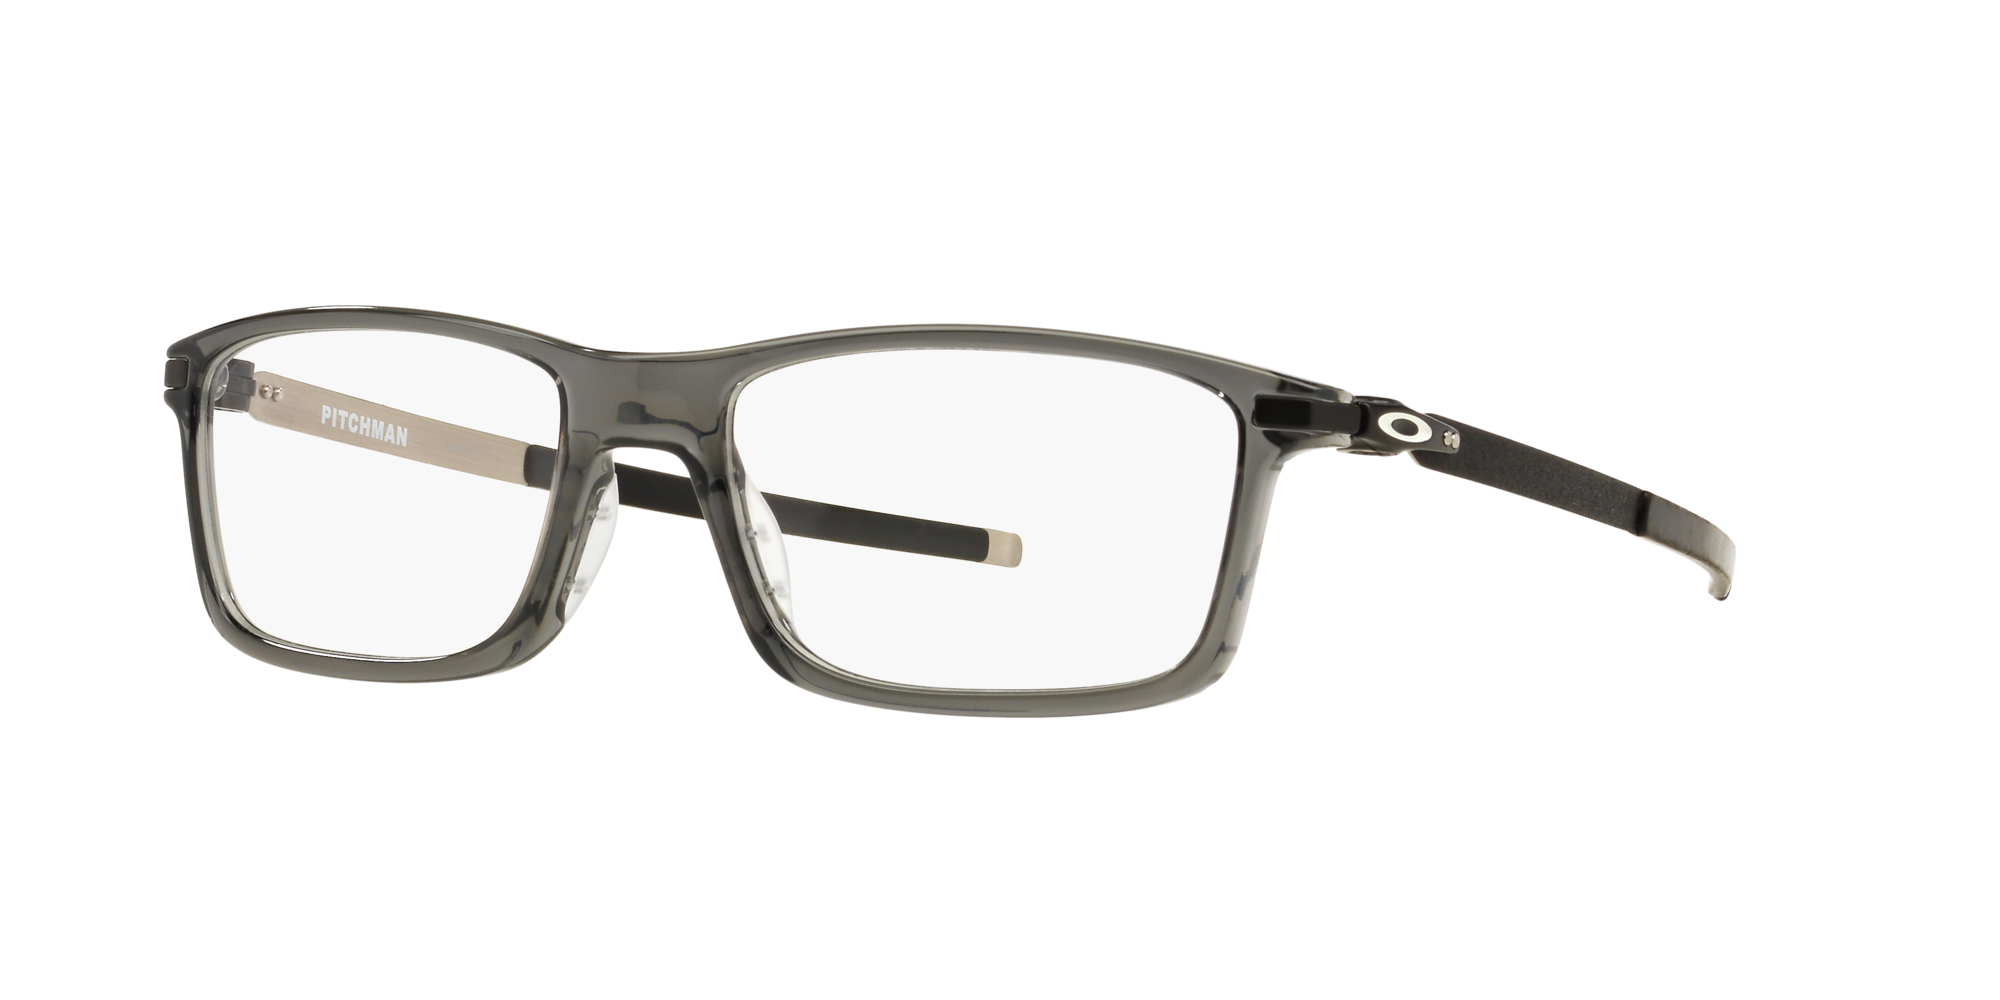 Angle_Left01 Oakley PITCHMAN OX 8050 (805006) Glasses Transparent / Grey